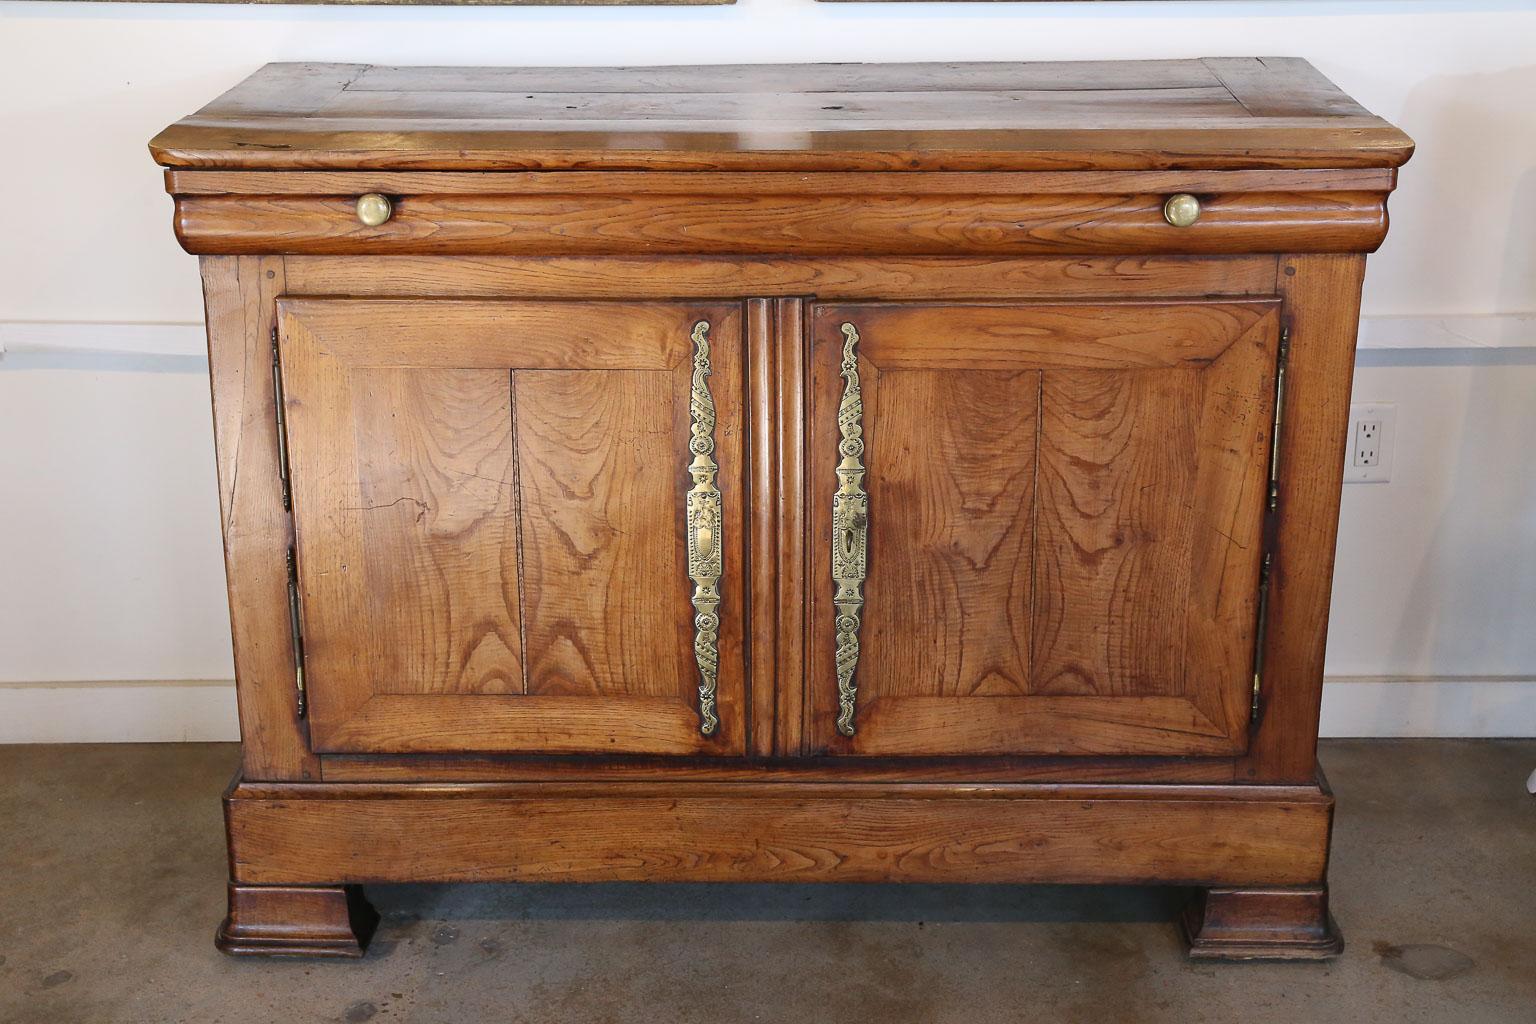 A beautiful antique French buffet featuring one drawer and two lower doors with brass hardware and key. As seen in the photos, the escutcheons depict Christ on the Cross and two Angels praying beneath Him, this leads us to believe the piece was